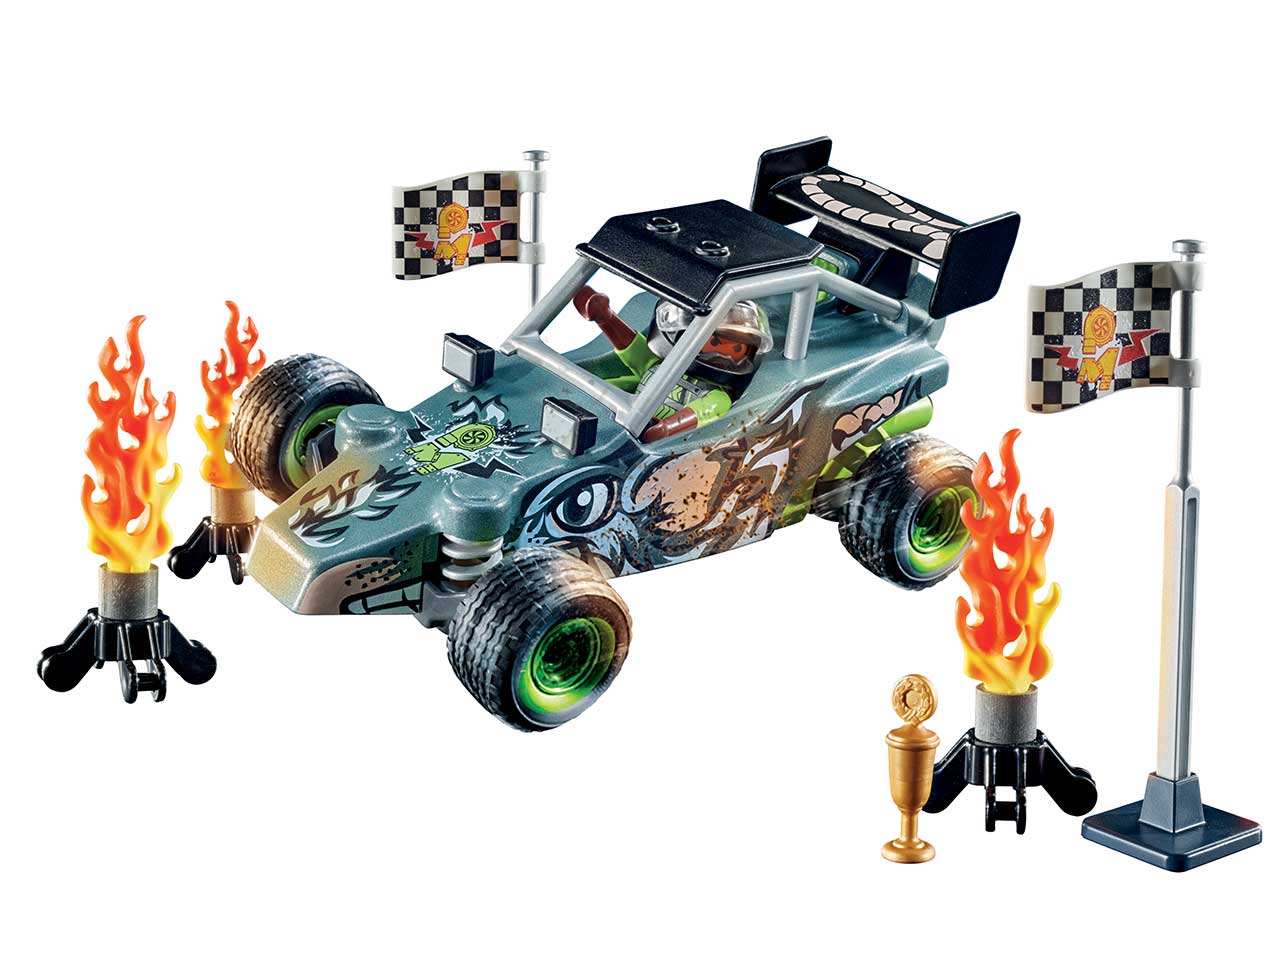 Playmobil stunt show offroad buggy